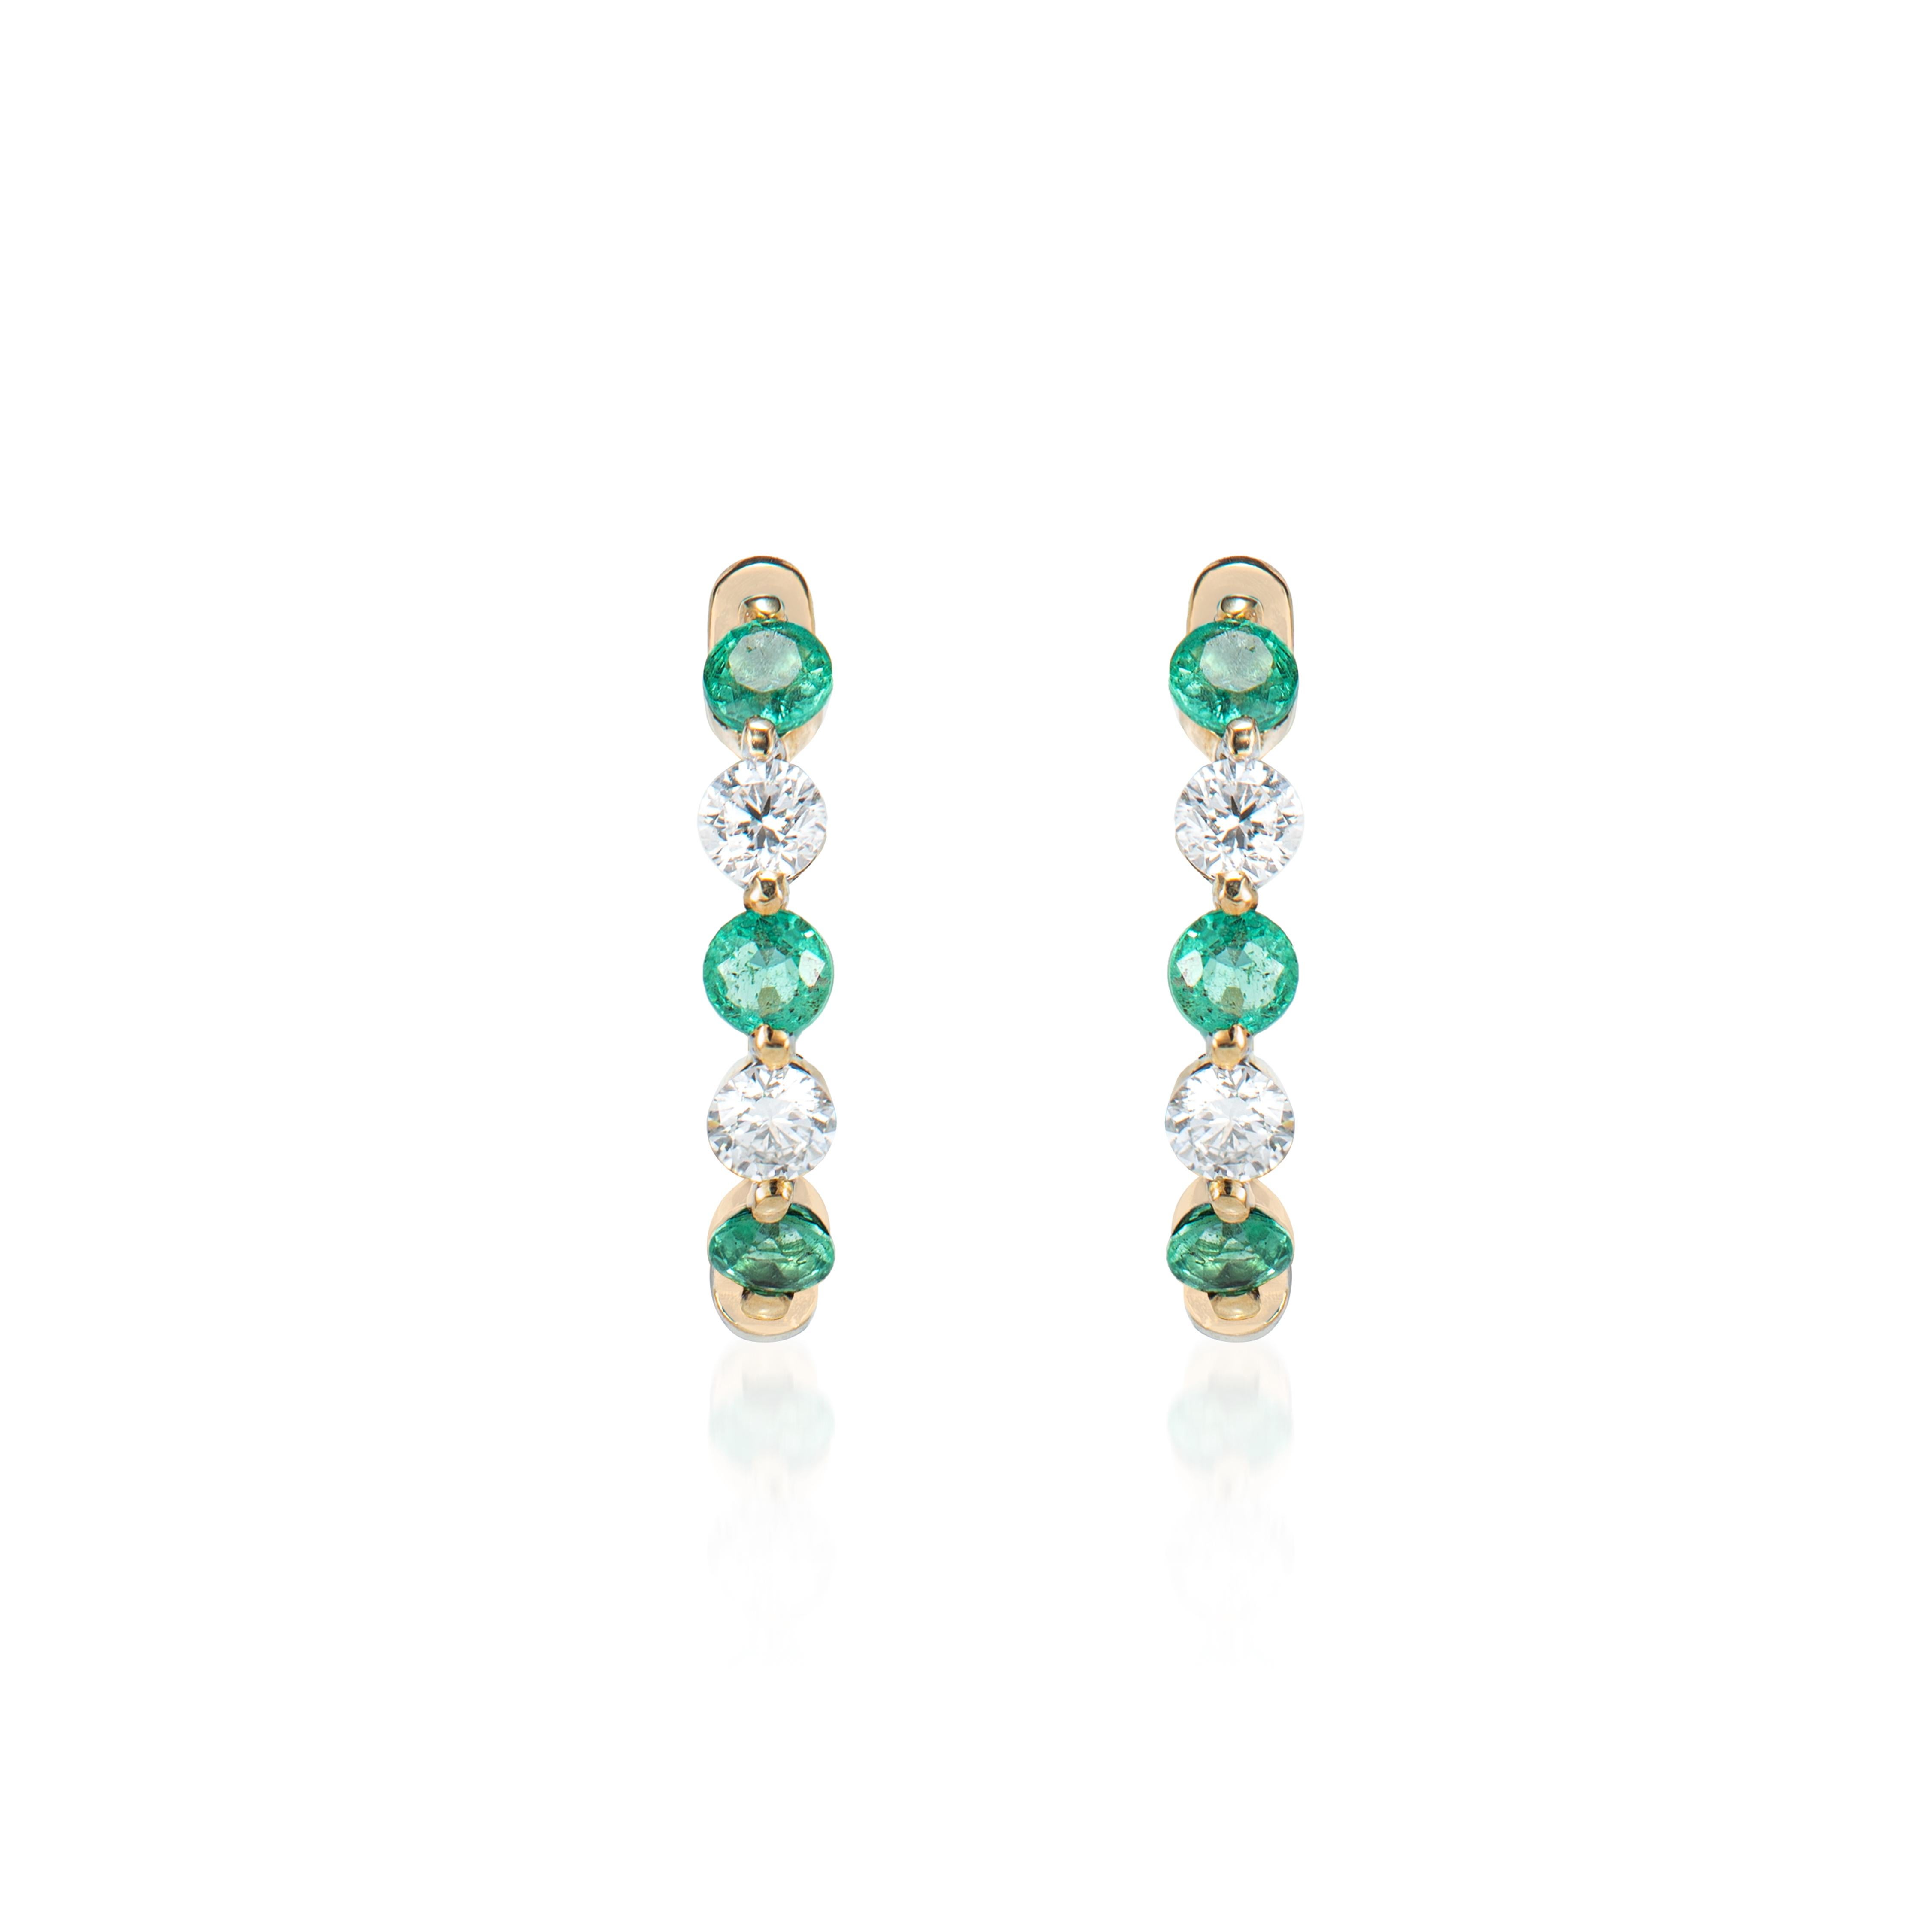 Contemporary 0.502 Carat Emerald Hoop Earrings in 14 Karat Yellow Gold with White Diamond For Sale